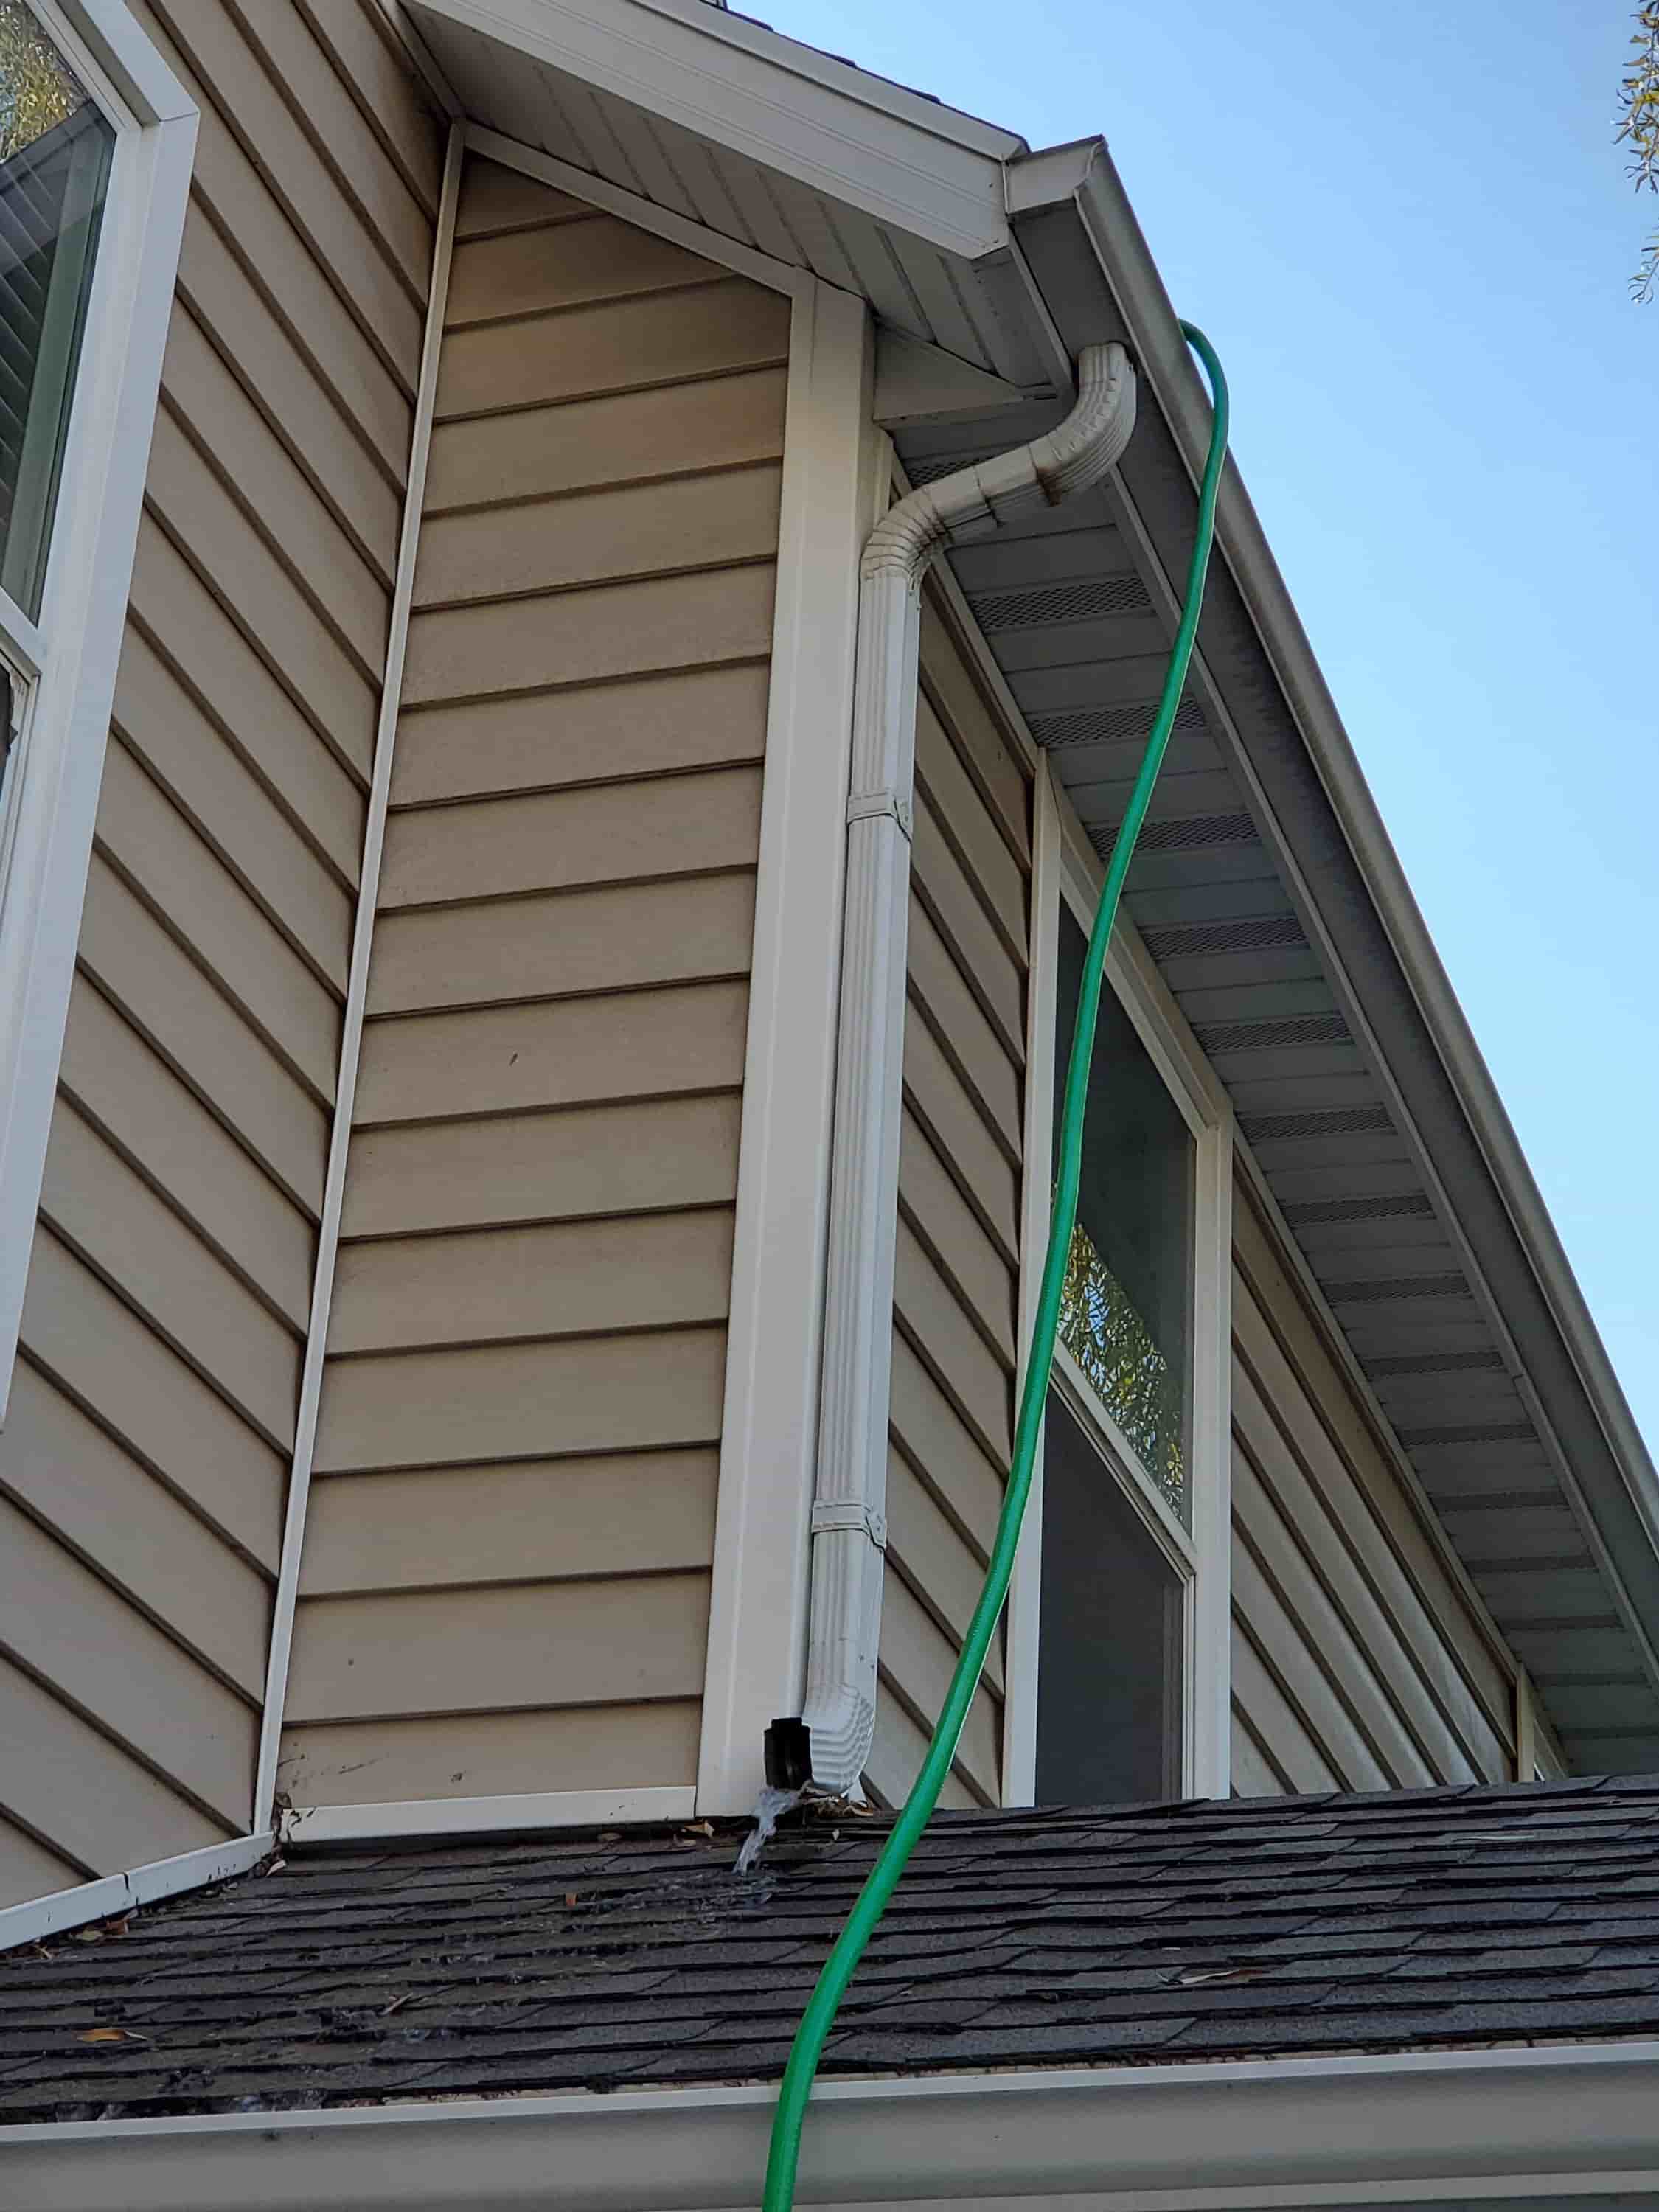 gutter cleaning equipment lowes